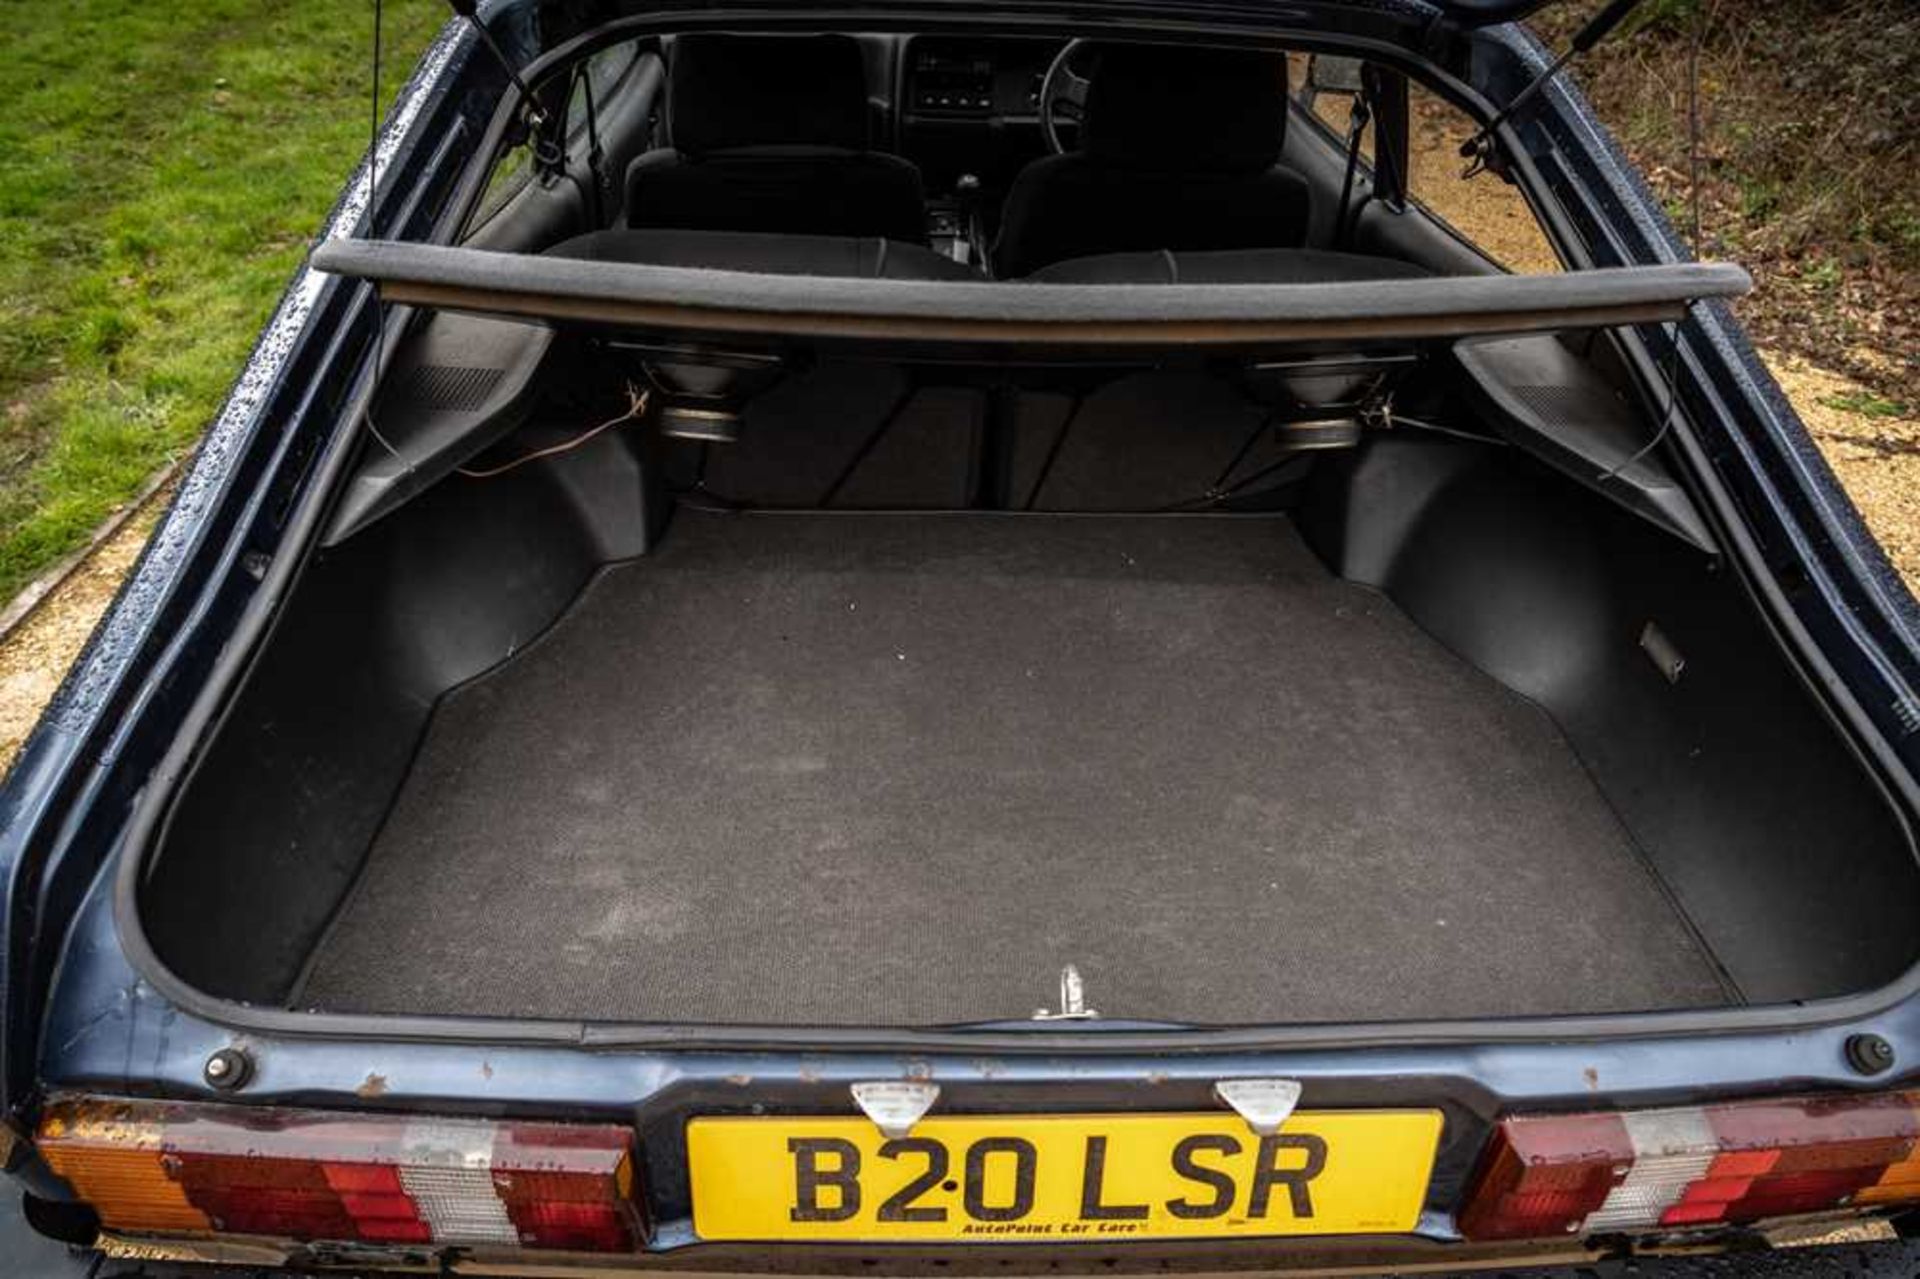 1985 Ford Capri Laser 2.0 Litre Warranted 55,300 miles from new - Image 52 of 67